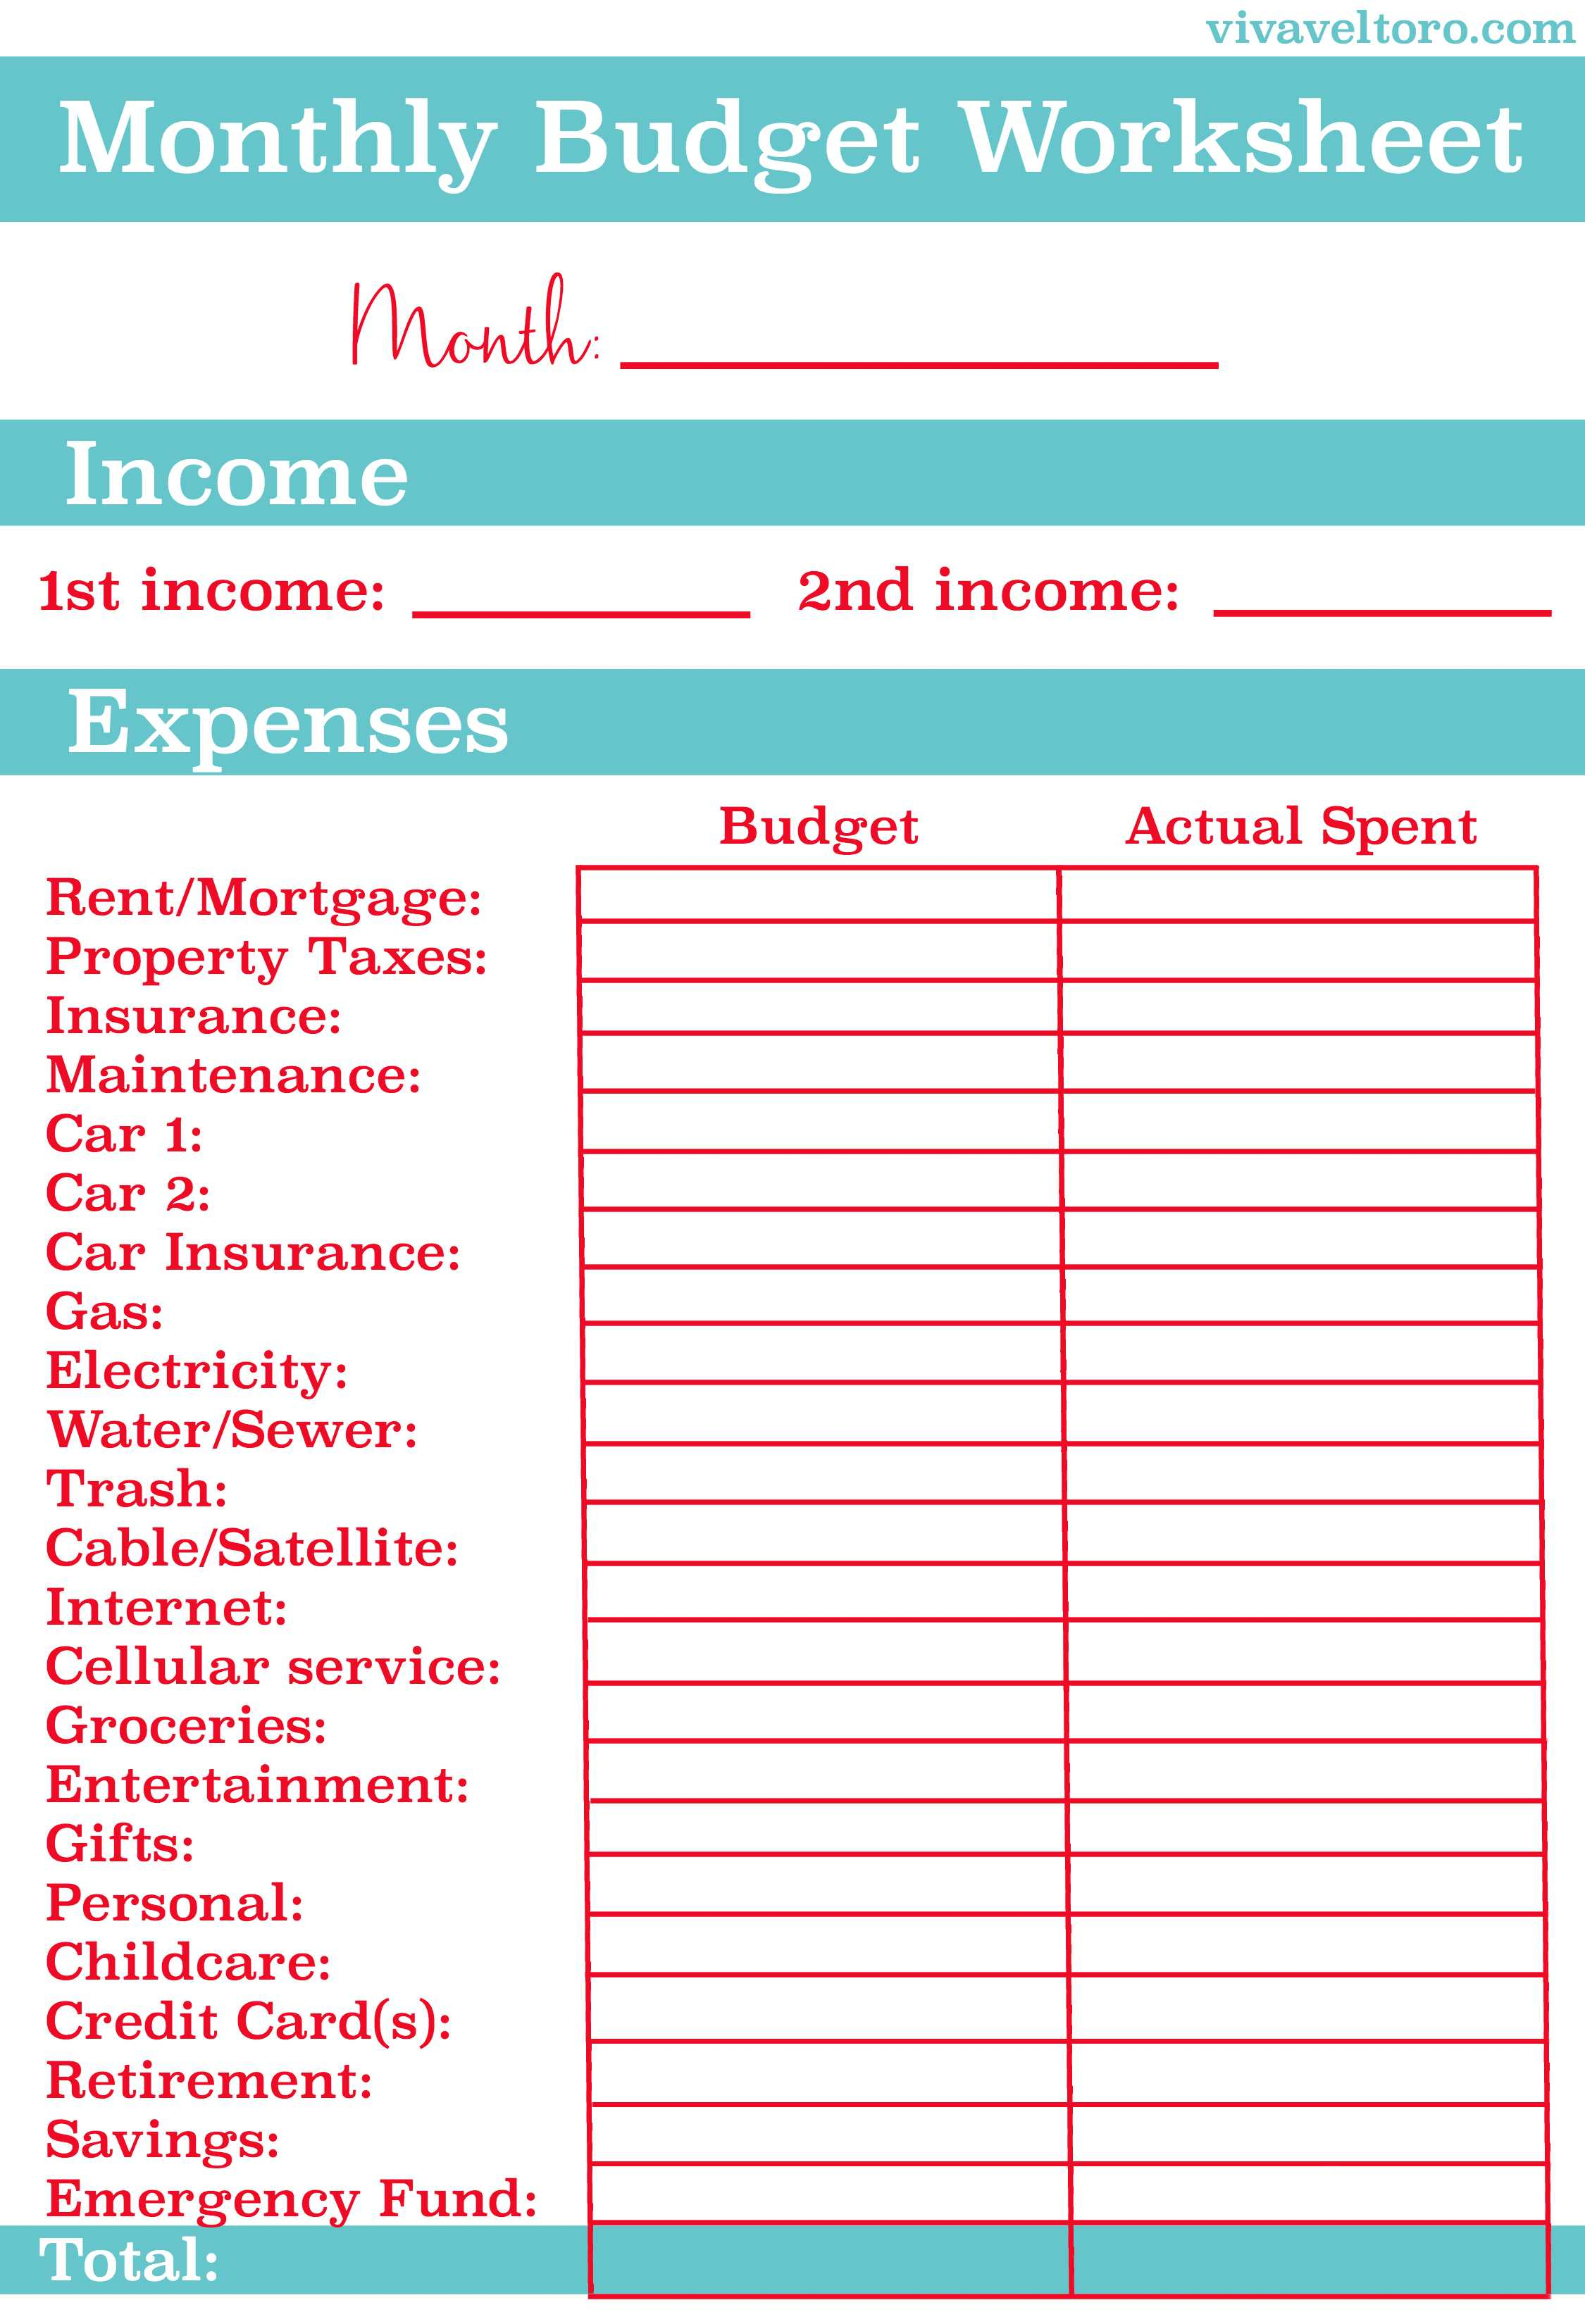 Online Budget Spreadsheet With Free Mileage Expense Report Template Budget Spreadsheet Excel Online